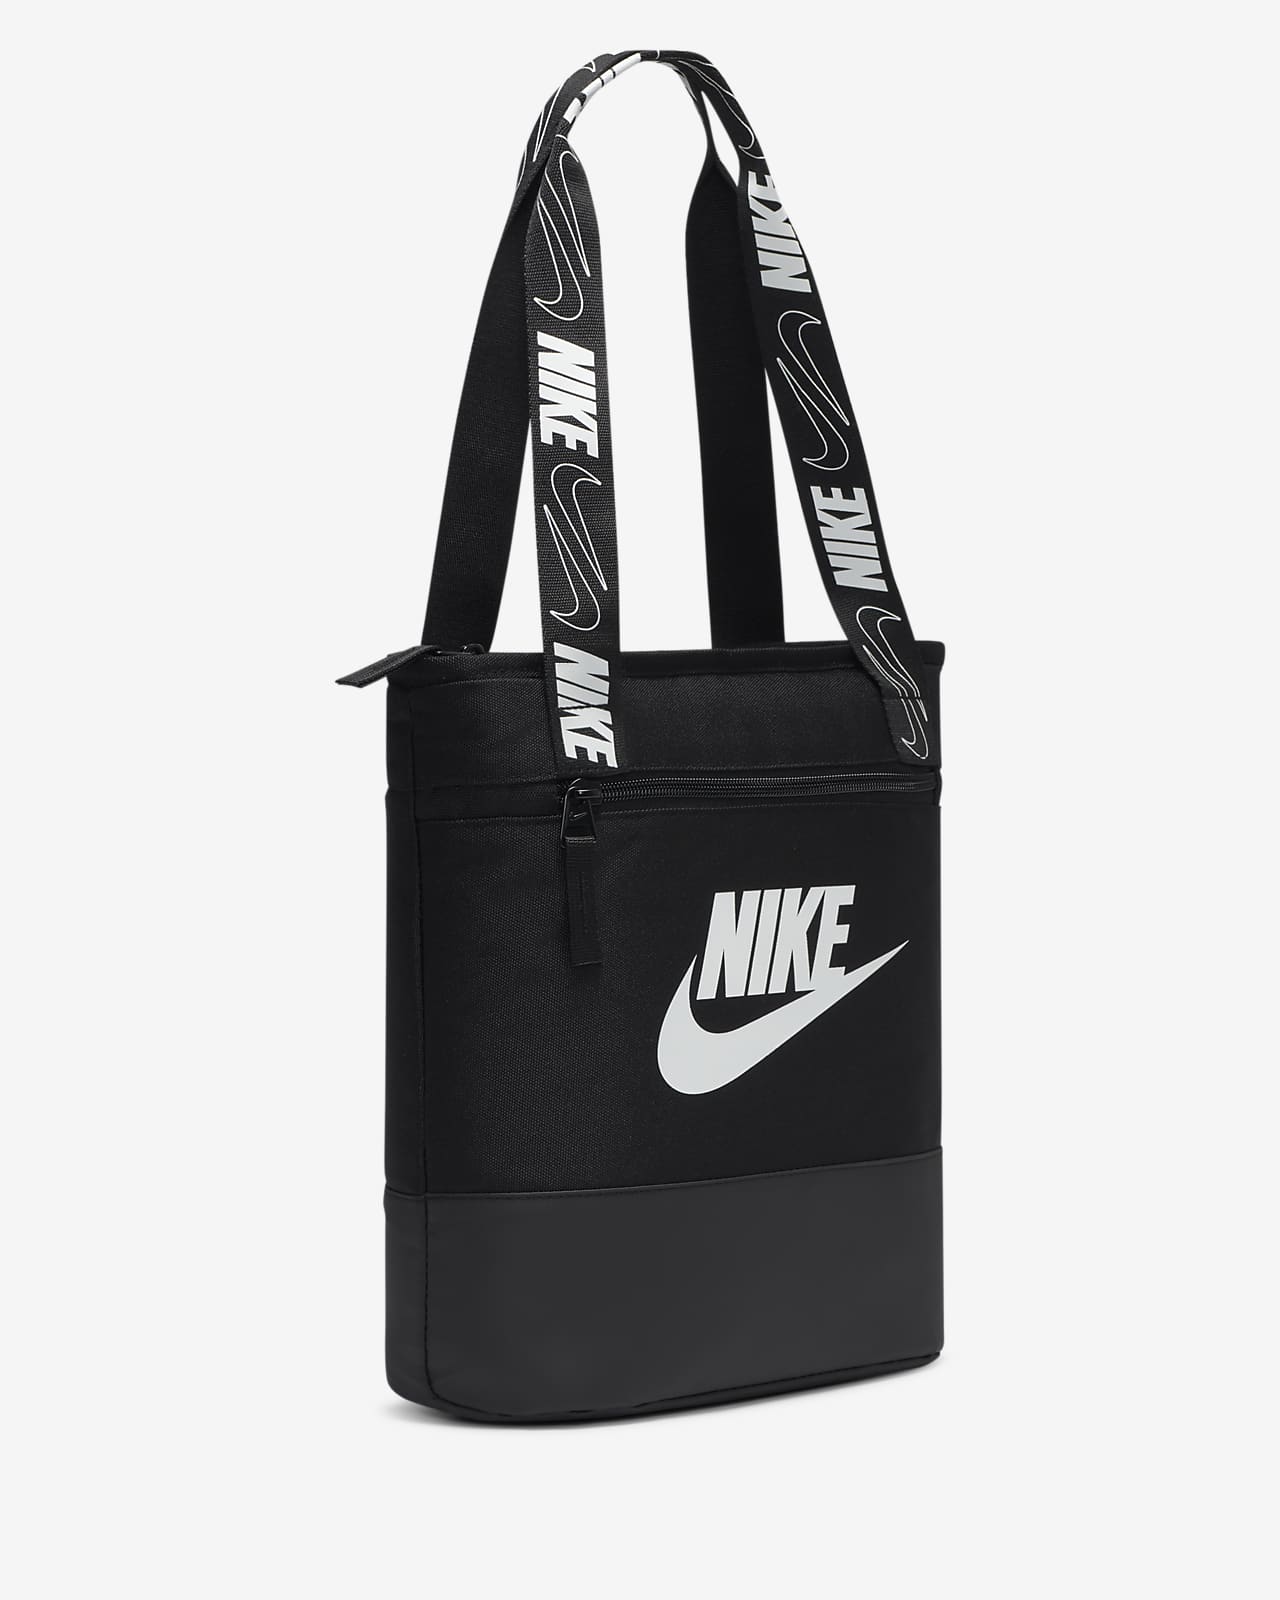 Nike Futura Fuel Pack - Tote Lunch Bag - Insulated - University